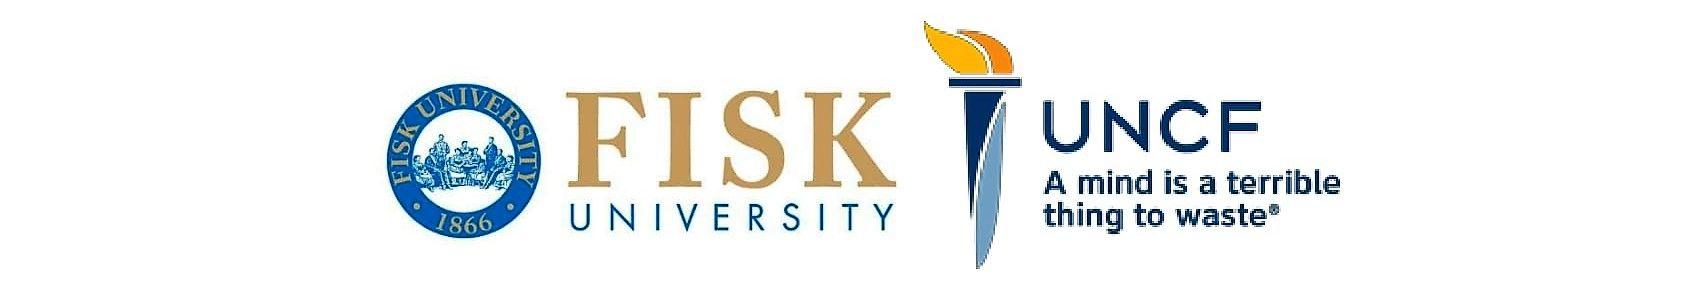 UNCF Logo - New UNCF Study Confirms that Fisk University Contributes to Local